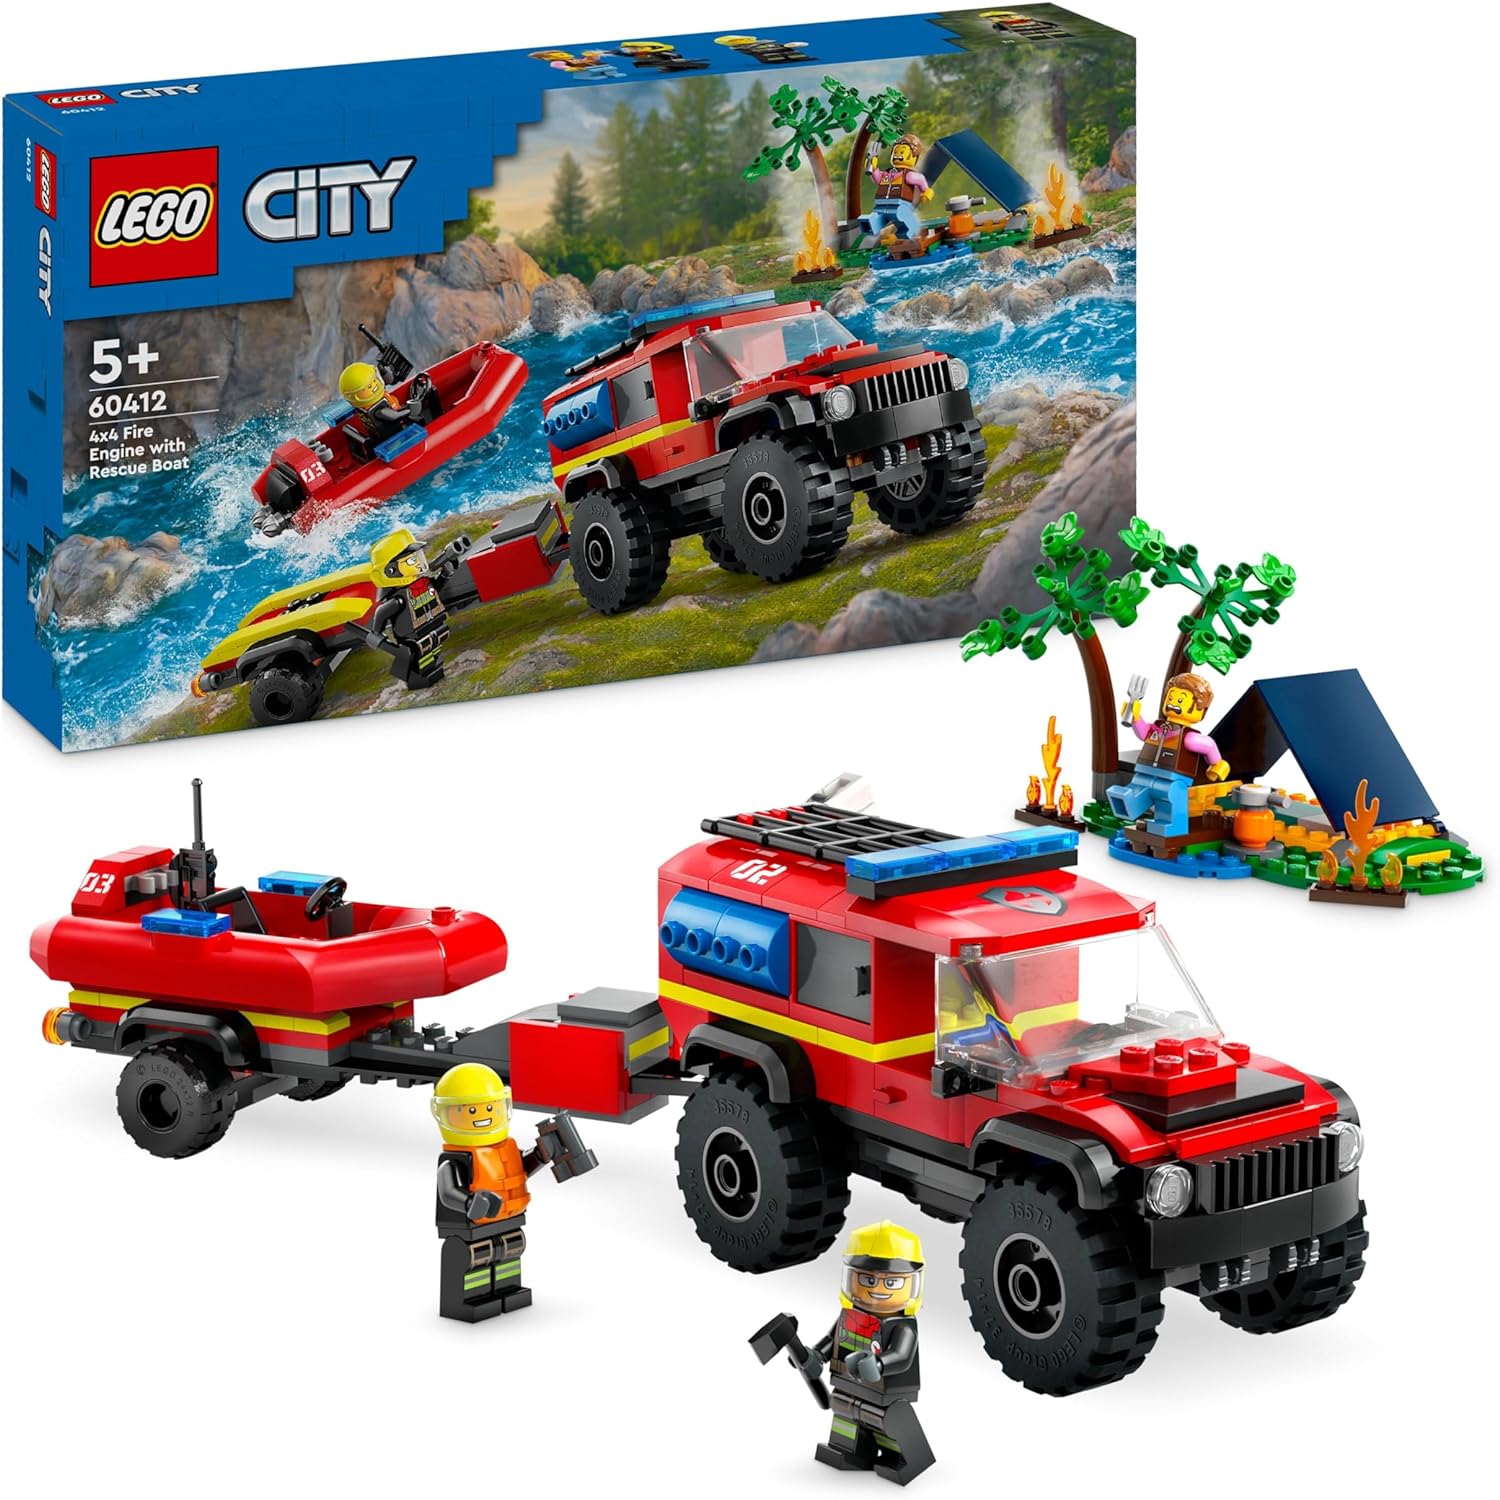 LEGO 60412 City Fire Terrain Vehicle with Lifeboat, Off-Road Car Toy for Children from 5 Years, Ambulance with Inflatable Boat, Trailer, Tent and 3 Mini Figures, Gift for Boys and Girls